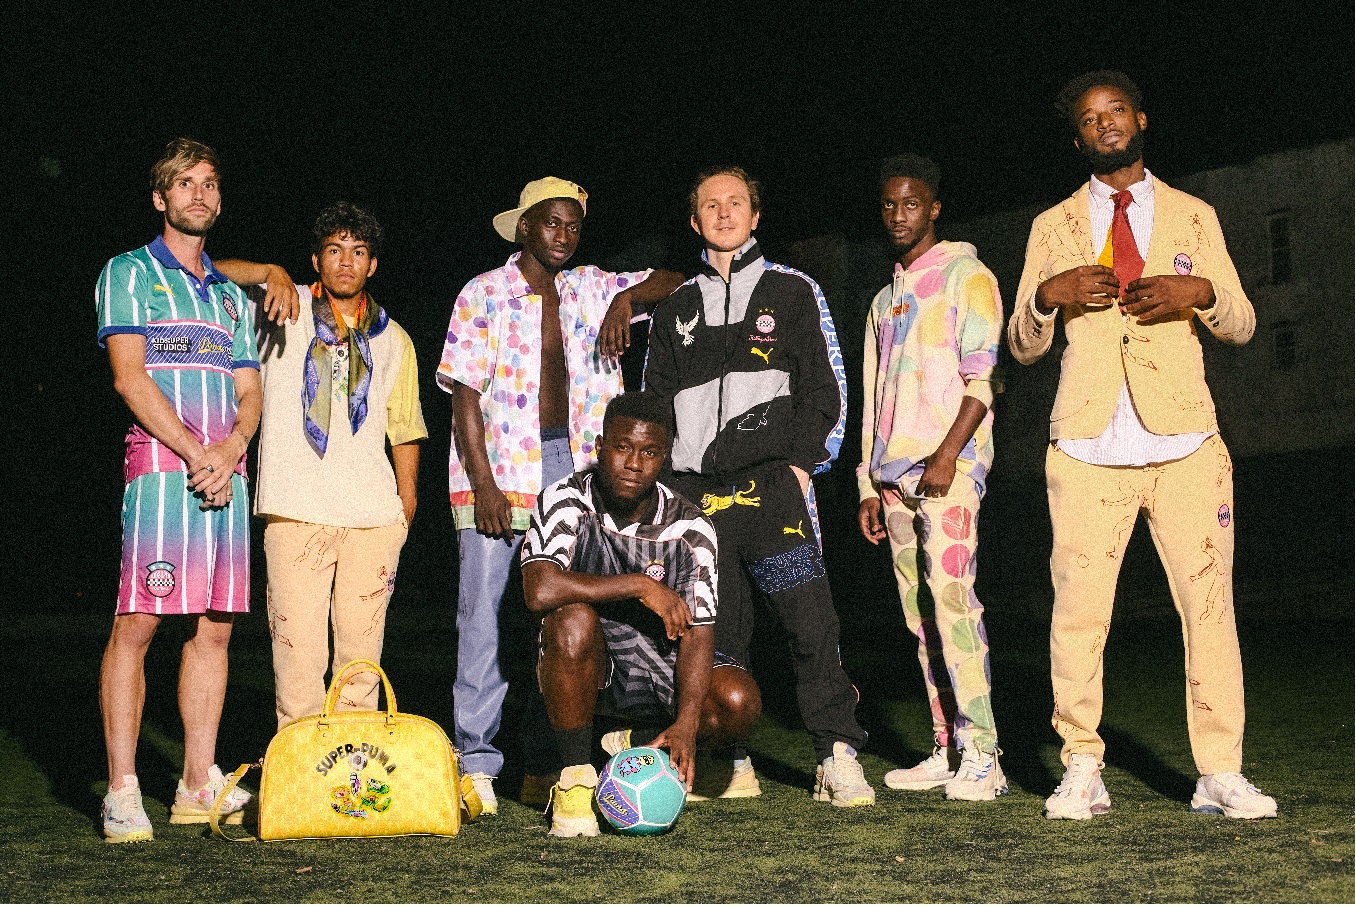 PUMA and creative artists Kidsuper Studios release football inspired streetwear collection